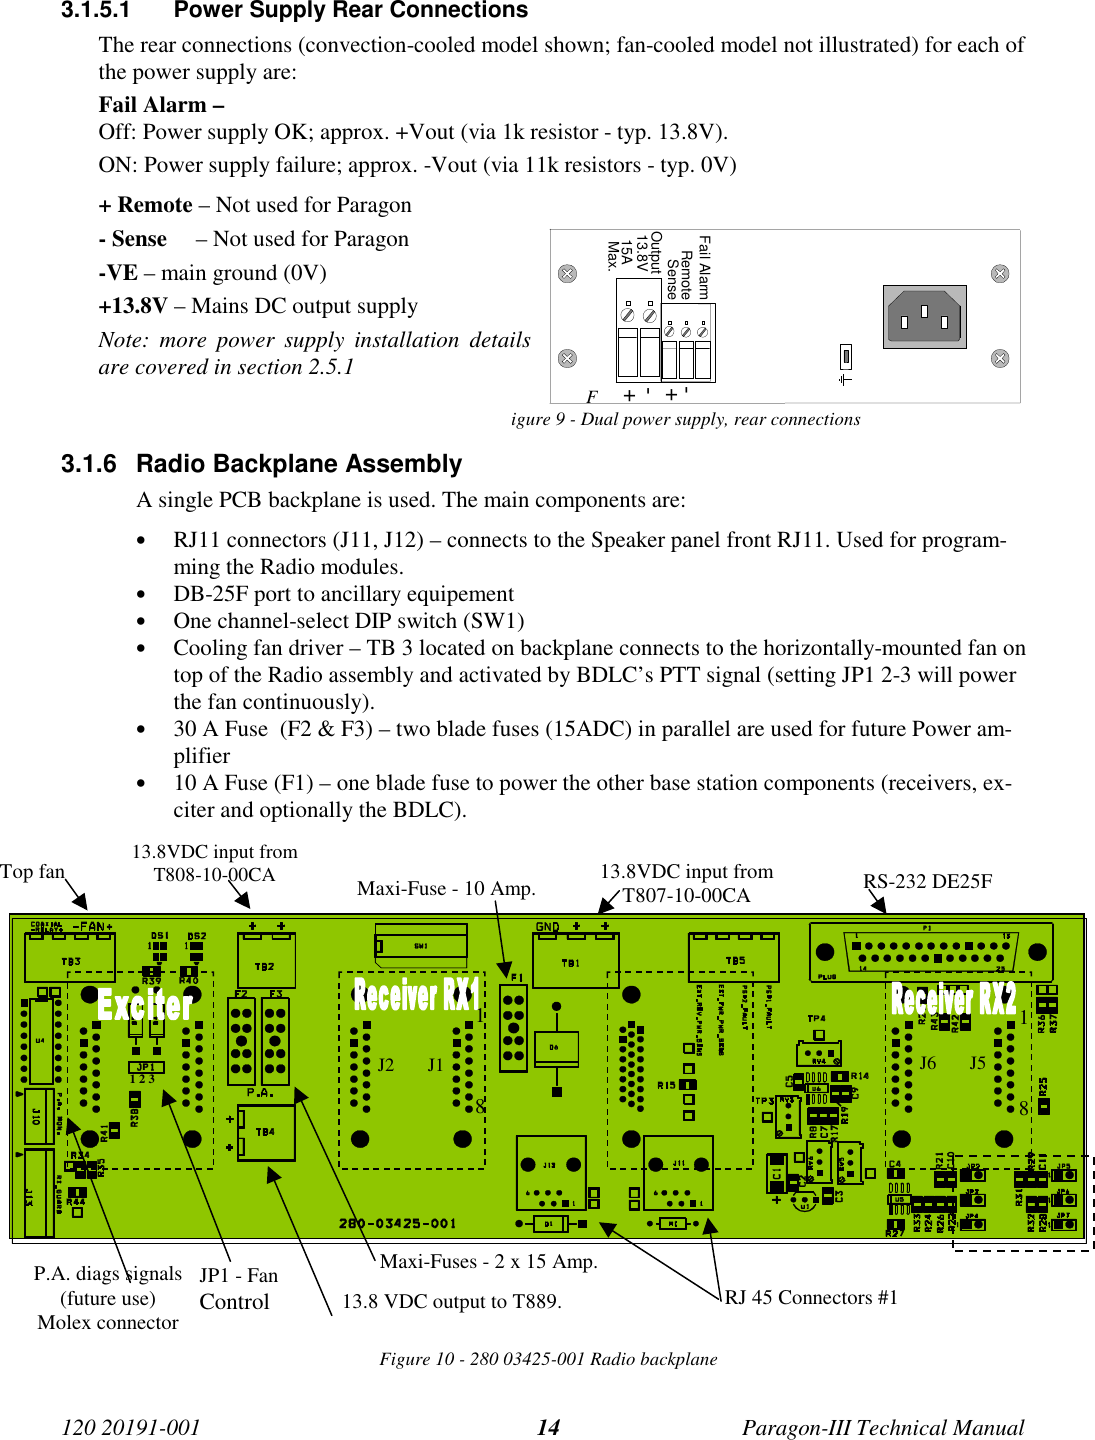 120 20191-001 Paragon-III Technical Manual143.1.5.1  Power Supply Rear ConnectionsThe rear connections (convection-cooled model shown; fan-cooled model not illustrated) for each ofthe power supply are:Fail Alarm –Off: Power supply OK; approx. +Vout (via 1k resistor - typ. 13.8V).ON: Power supply failure; approx. -Vout (via 11k resistors - typ. 0V)+ Remote – Not used for Paragon- Sense     – Not used for Paragon-VE – main ground (0V)+13.8V – Mains DC output supplyNote: more power supply installation detailsare covered in section 2.5.1Figure 9 - Dual power supply, rear connections3.1.6  Radio Backplane AssemblyA single PCB backplane is used. The main components are:• RJ11 connectors (J11, J12) – connects to the Speaker panel front RJ11. Used for program-ming the Radio modules.• DB-25F port to ancillary equipement• One channel-select DIP switch (SW1)• Cooling fan driver – TB 3 located on backplane connects to the horizontally-mounted fan ontop of the Radio assembly and activated by BDLC’s PTT signal (setting JP1 2-3 will powerthe fan continuously).• 30 A Fuse  (F2 &amp; F3) – two blade fuses (15ADC) in parallel are used for future Power am-plifier• 10 A Fuse (F1) – one blade fuse to power the other base station components (receivers, ex-citer and optionally the BDLC).Figure 10 - 280 03425-001 Radio backplane15A+-OutputSense+-RemoteFail Alarm13.8VMax.Top fan 13.8VDC input fromT808-10-00CA 13.8VDC input fromT807-10-00CA RS-232 DE25FMaxi-Fuse - 10 Amp.13.8 VDC output to T889.Maxi-Fuses - 2 x 15 Amp.RJ 45 Connectors #11 2 3JP1 - FanControl1818J2       J1 J6       J5P.A. diags signals(future use)Molex connector